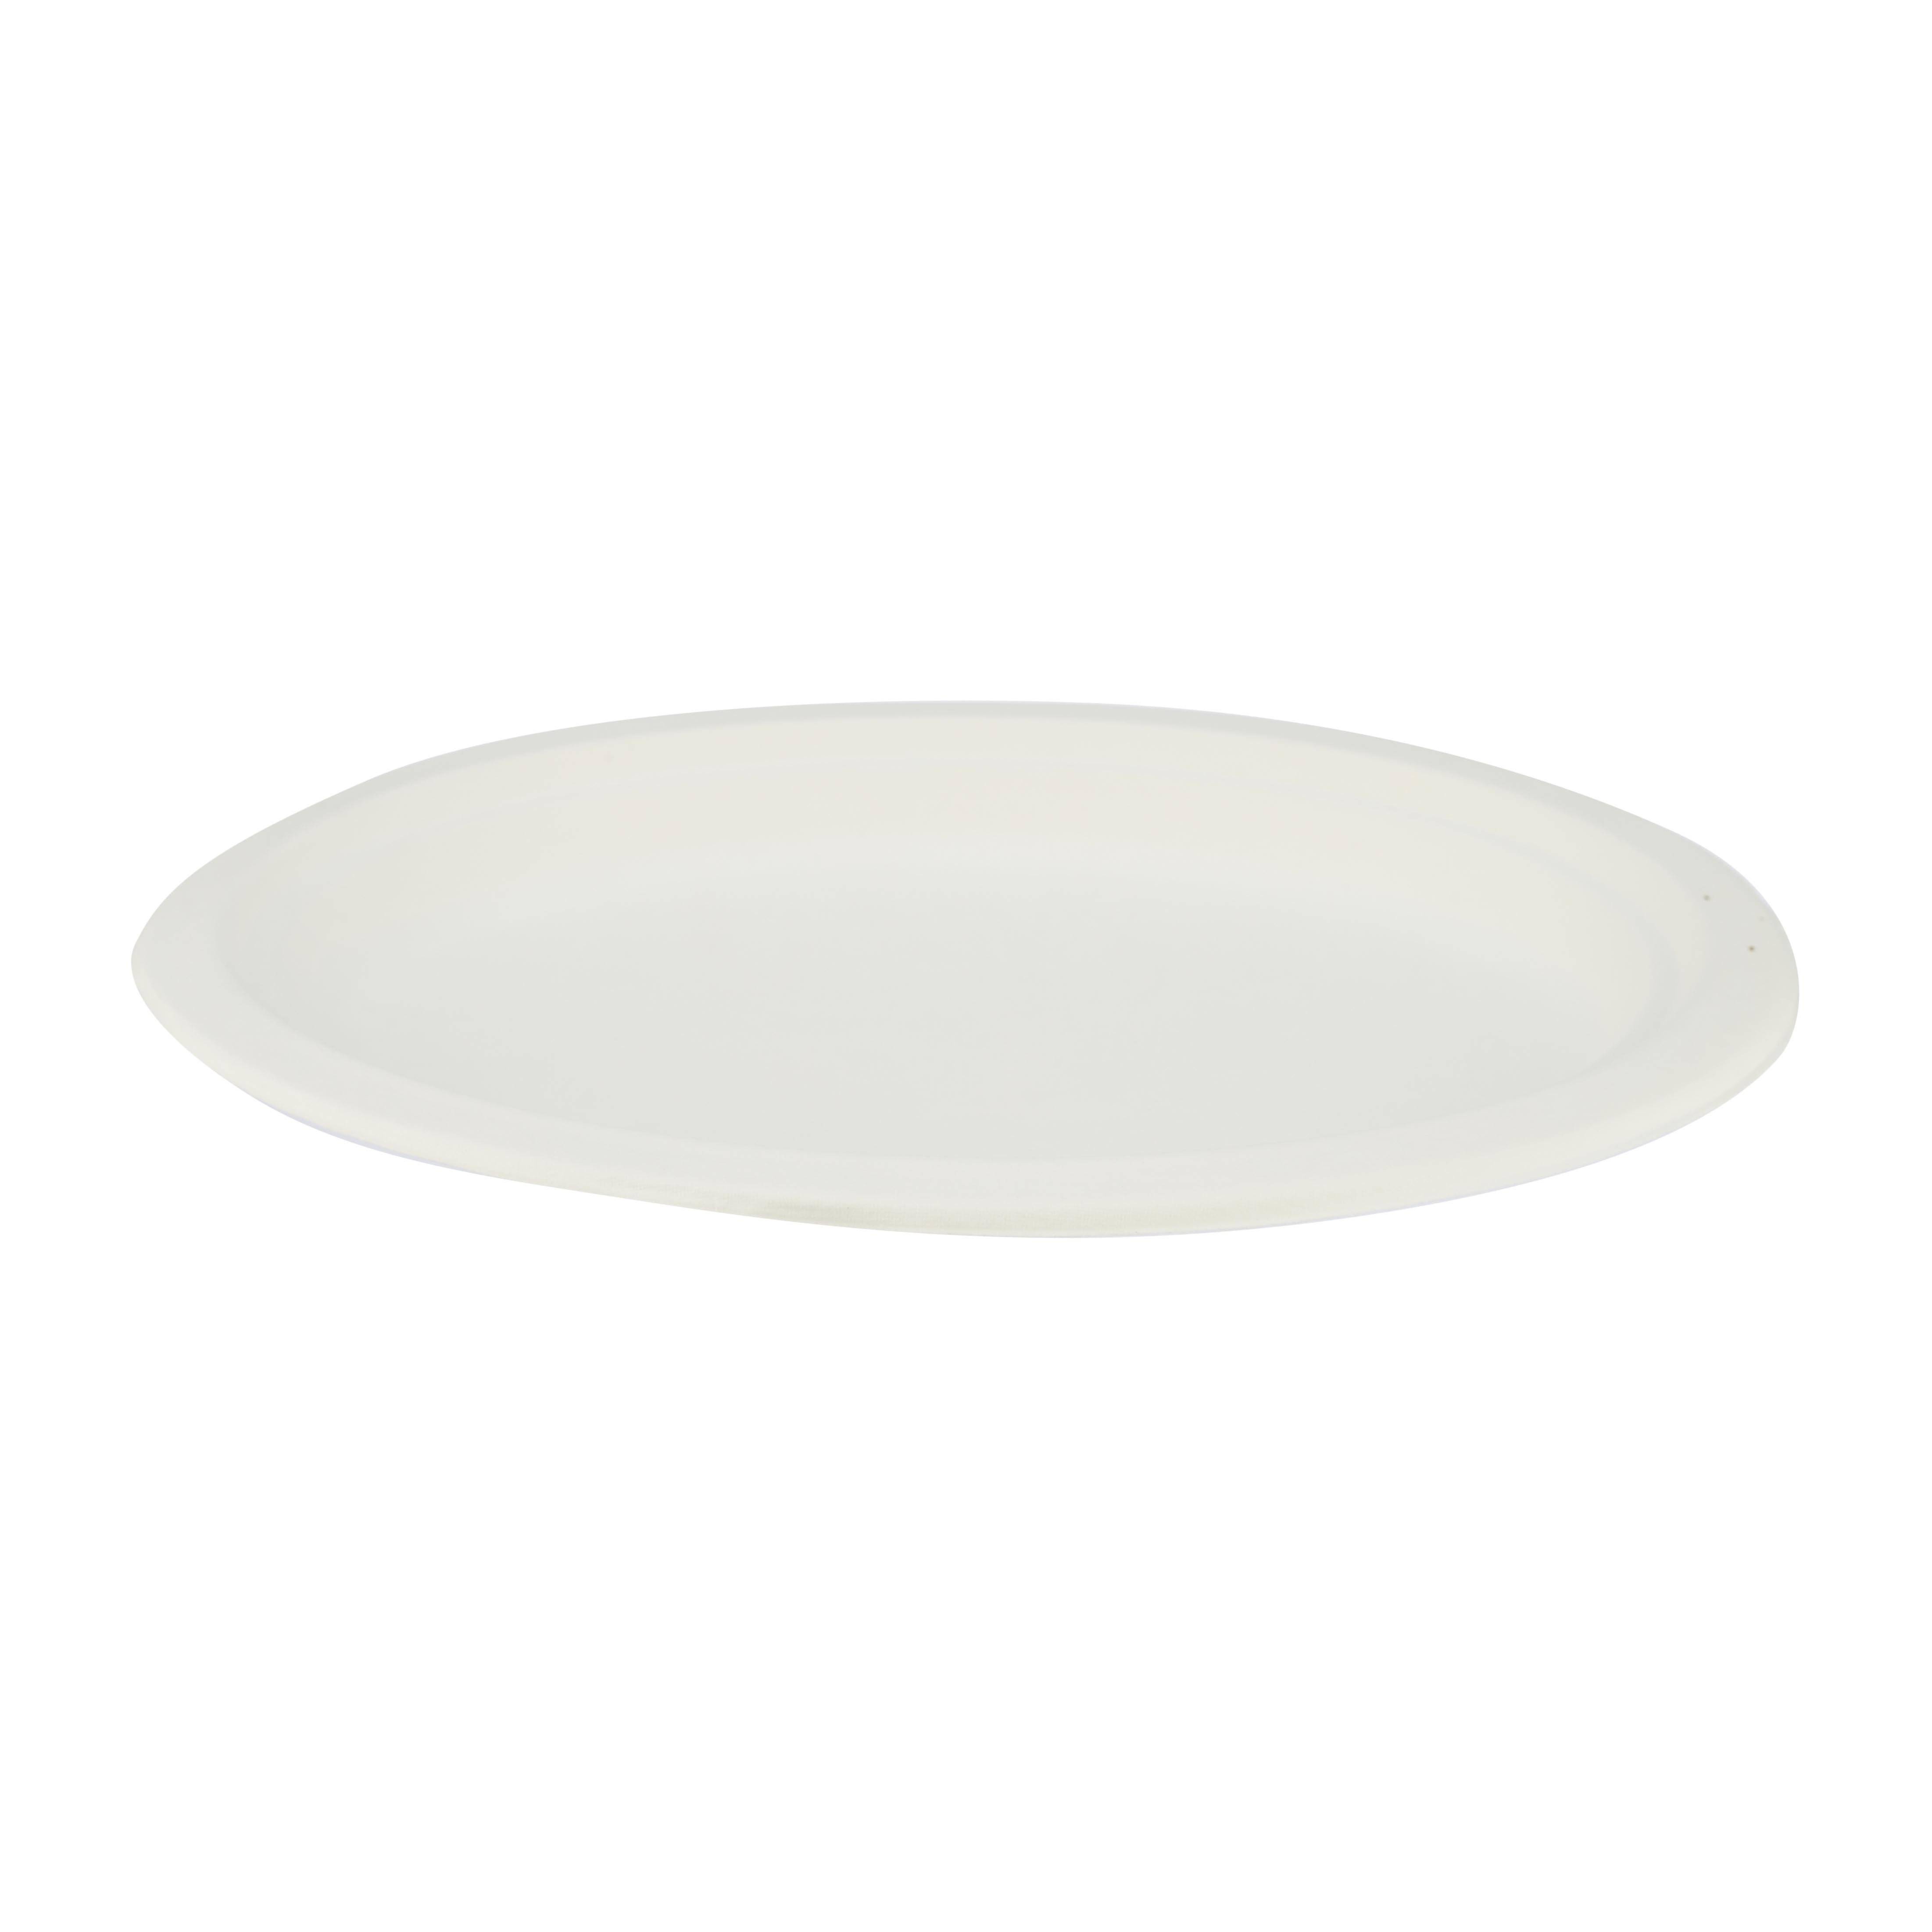 Bio-Degradable Oval Plate 12x10 Inch 100 Pieces - Hotpack Global